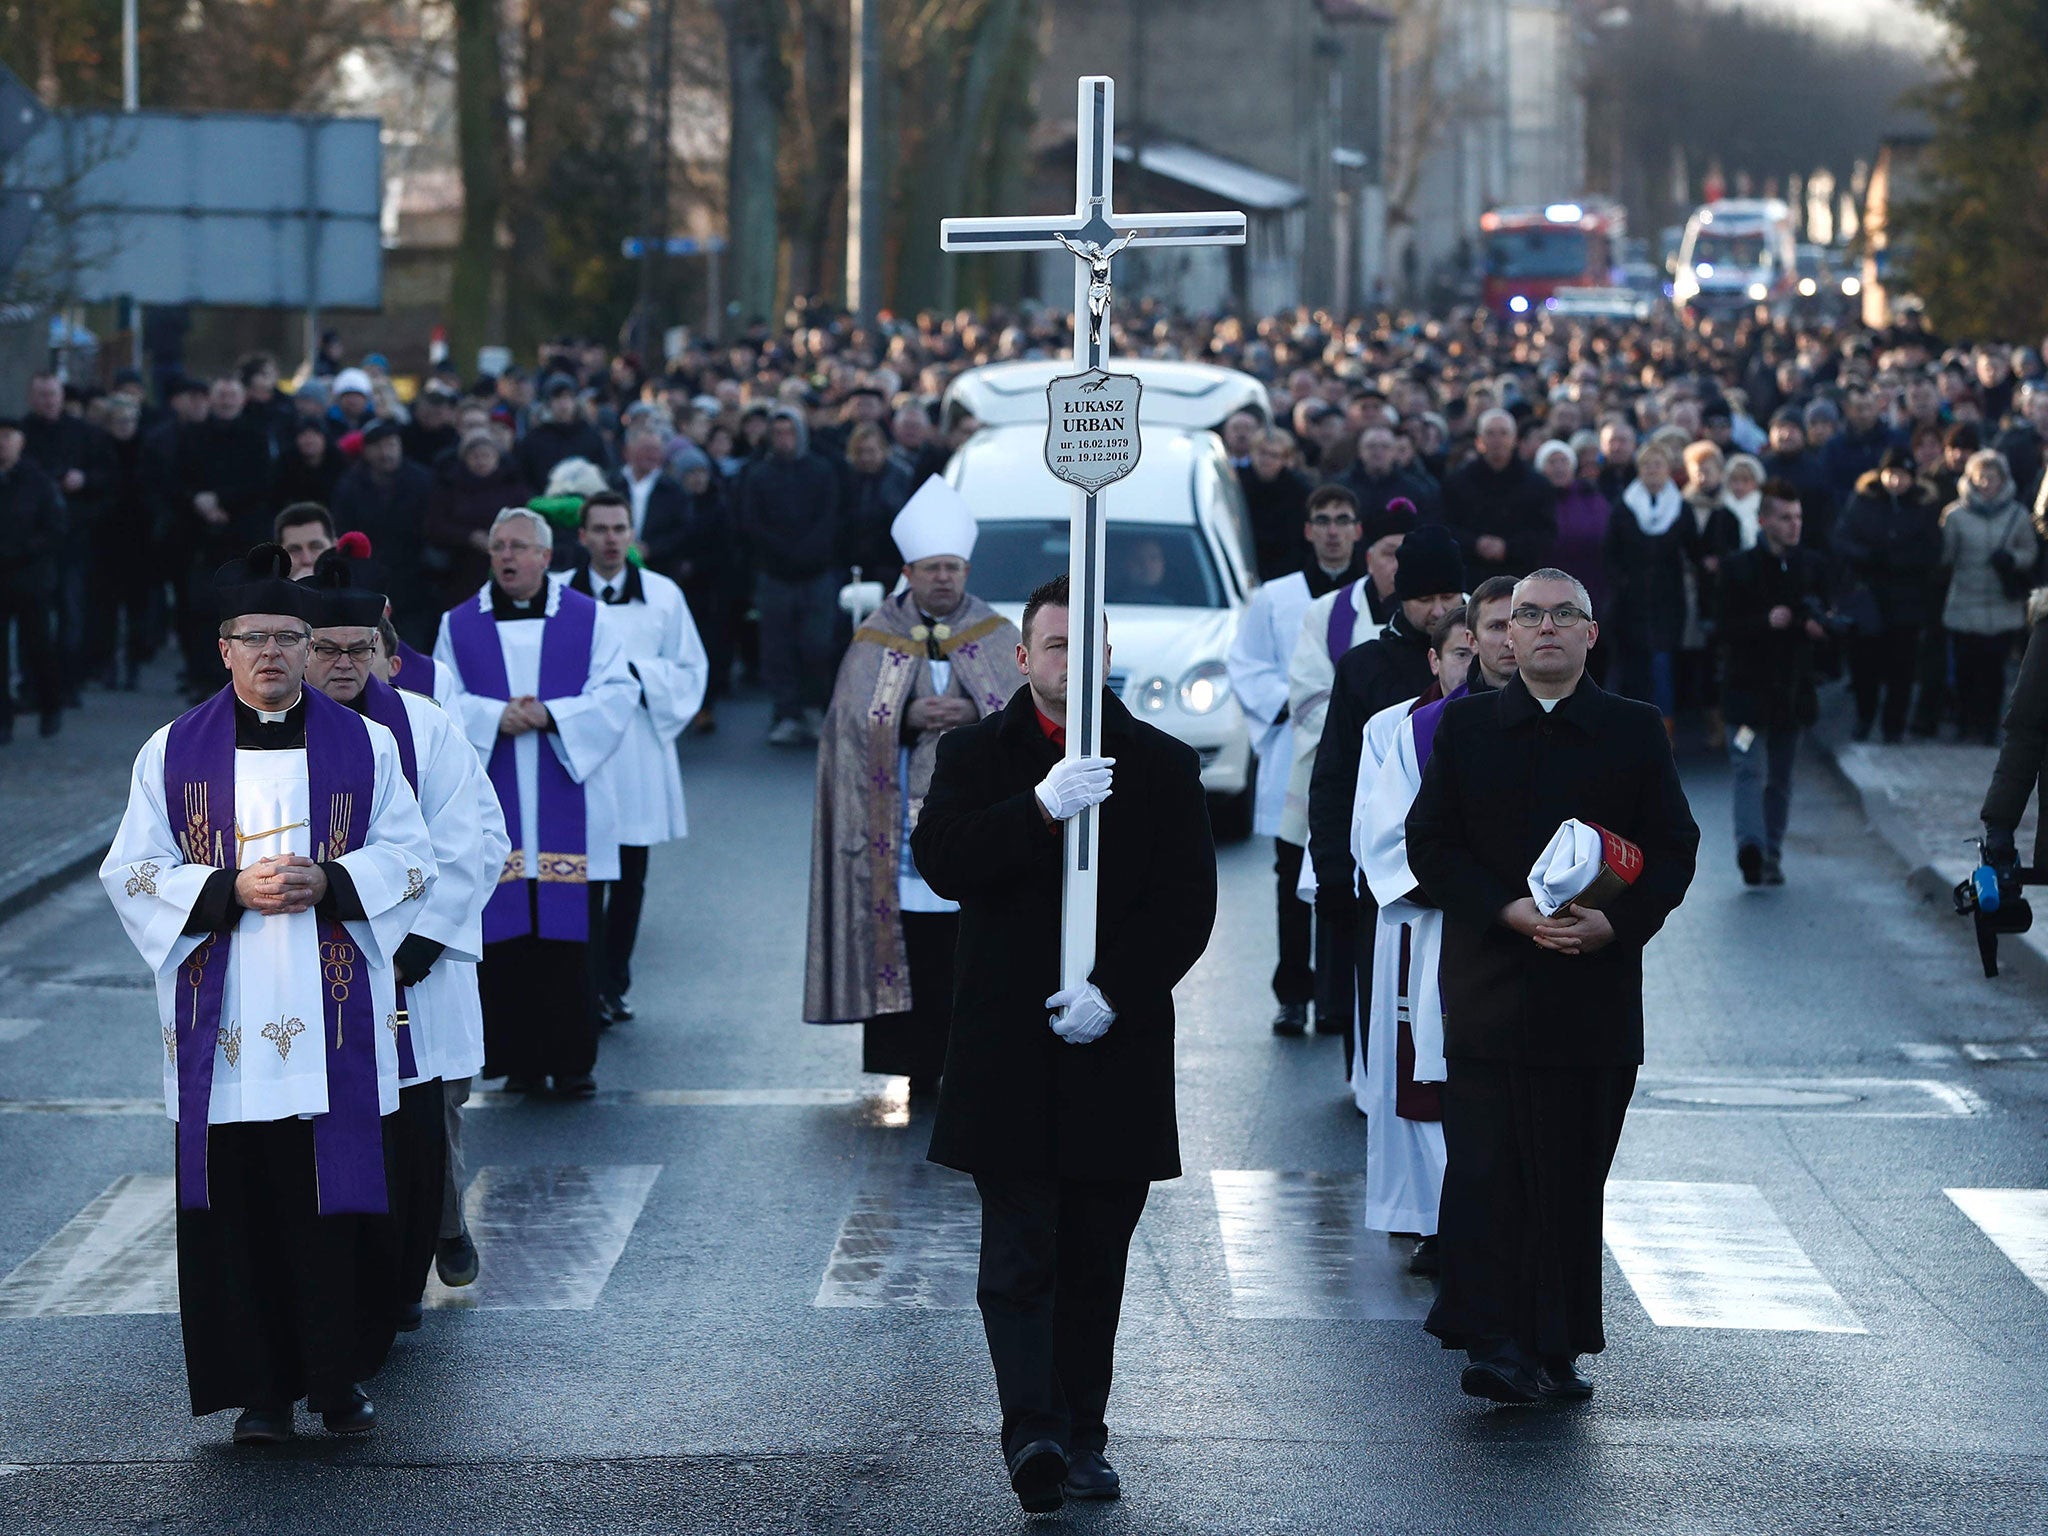 Mourners attend the funeral of Lukasz Urban, the Polish lorry driver who was killed in the Berlin Christmas market attack, in Banie, Poland, on 30 December